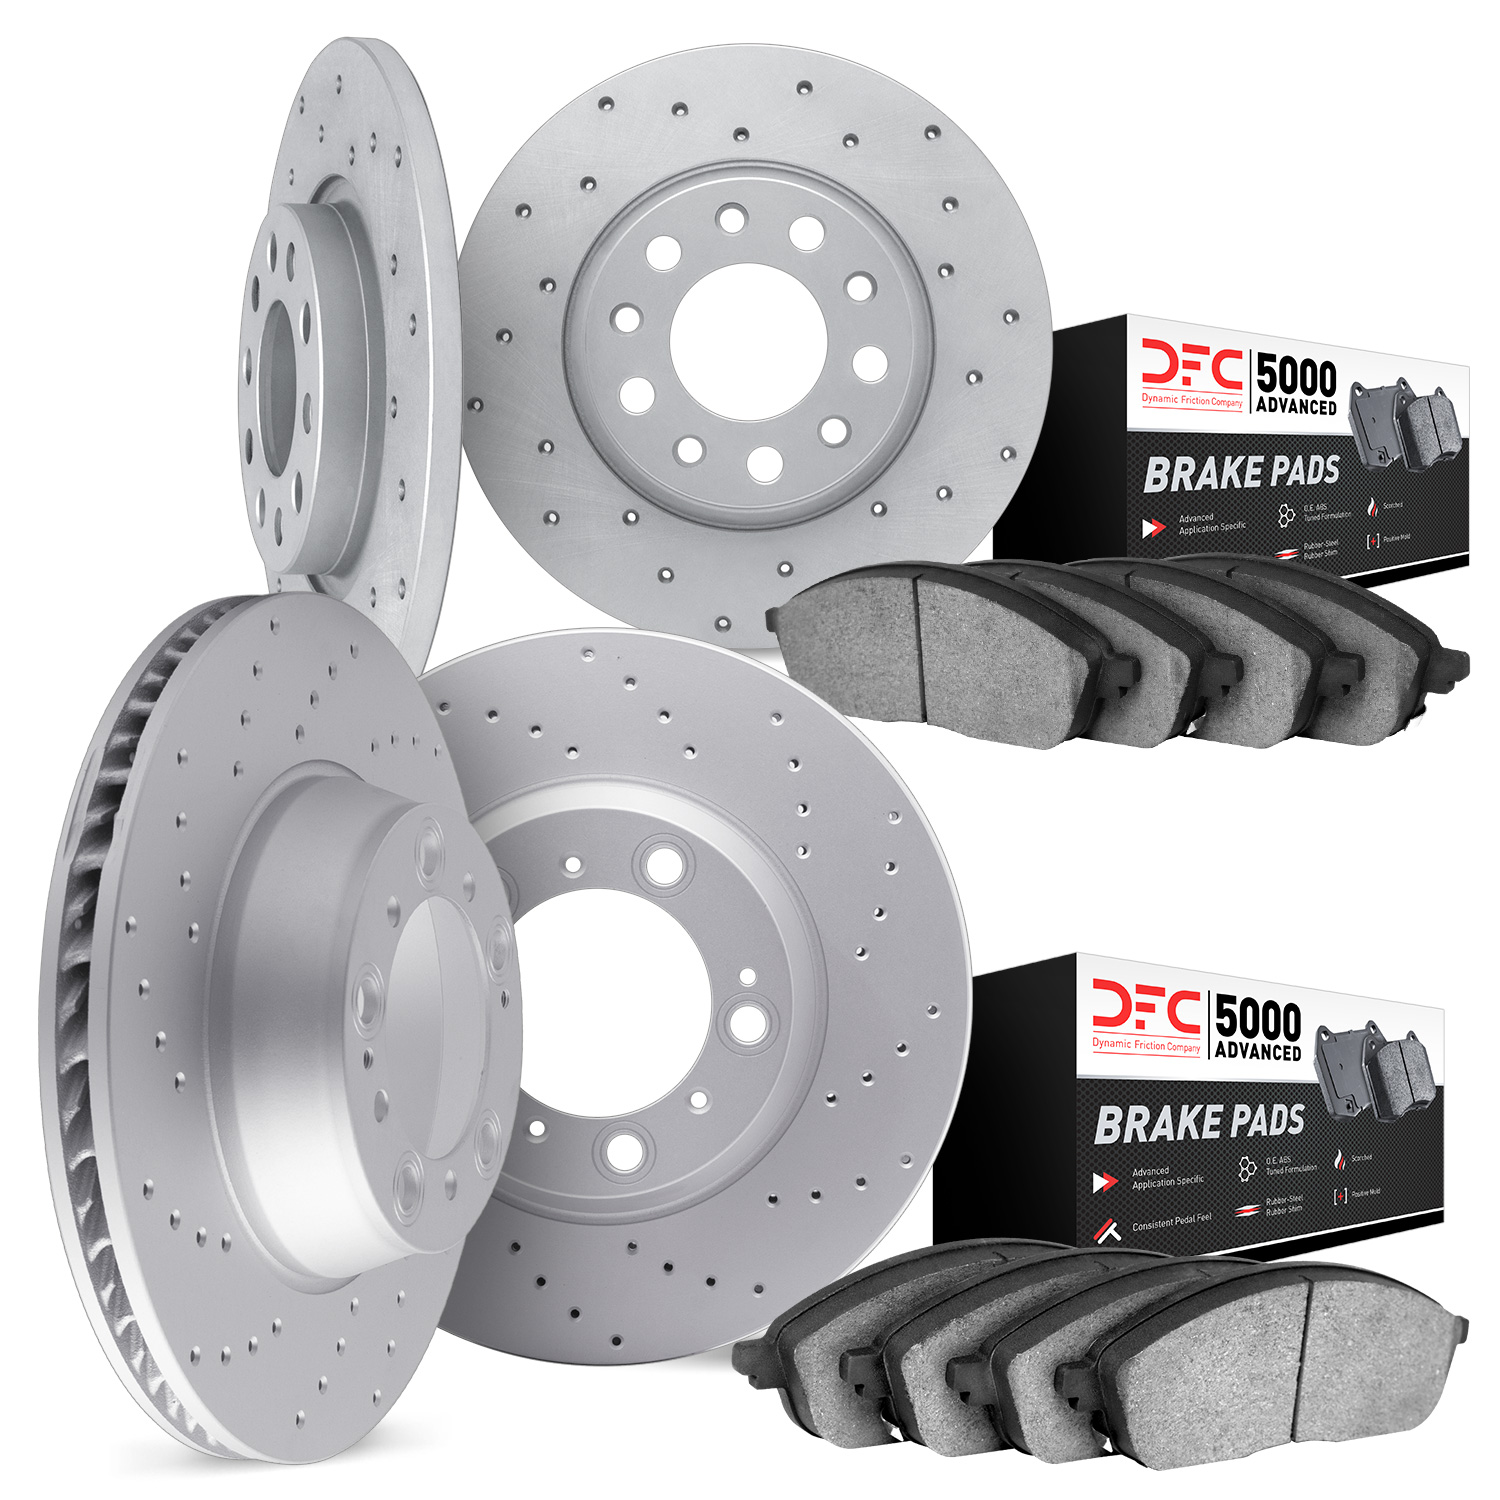 2704-54027 Geoperformance Drilled Brake Rotors with Active Performance Pads Kit, 2012-2018 Ford/Lincoln/Mercury/Mazda, Position: